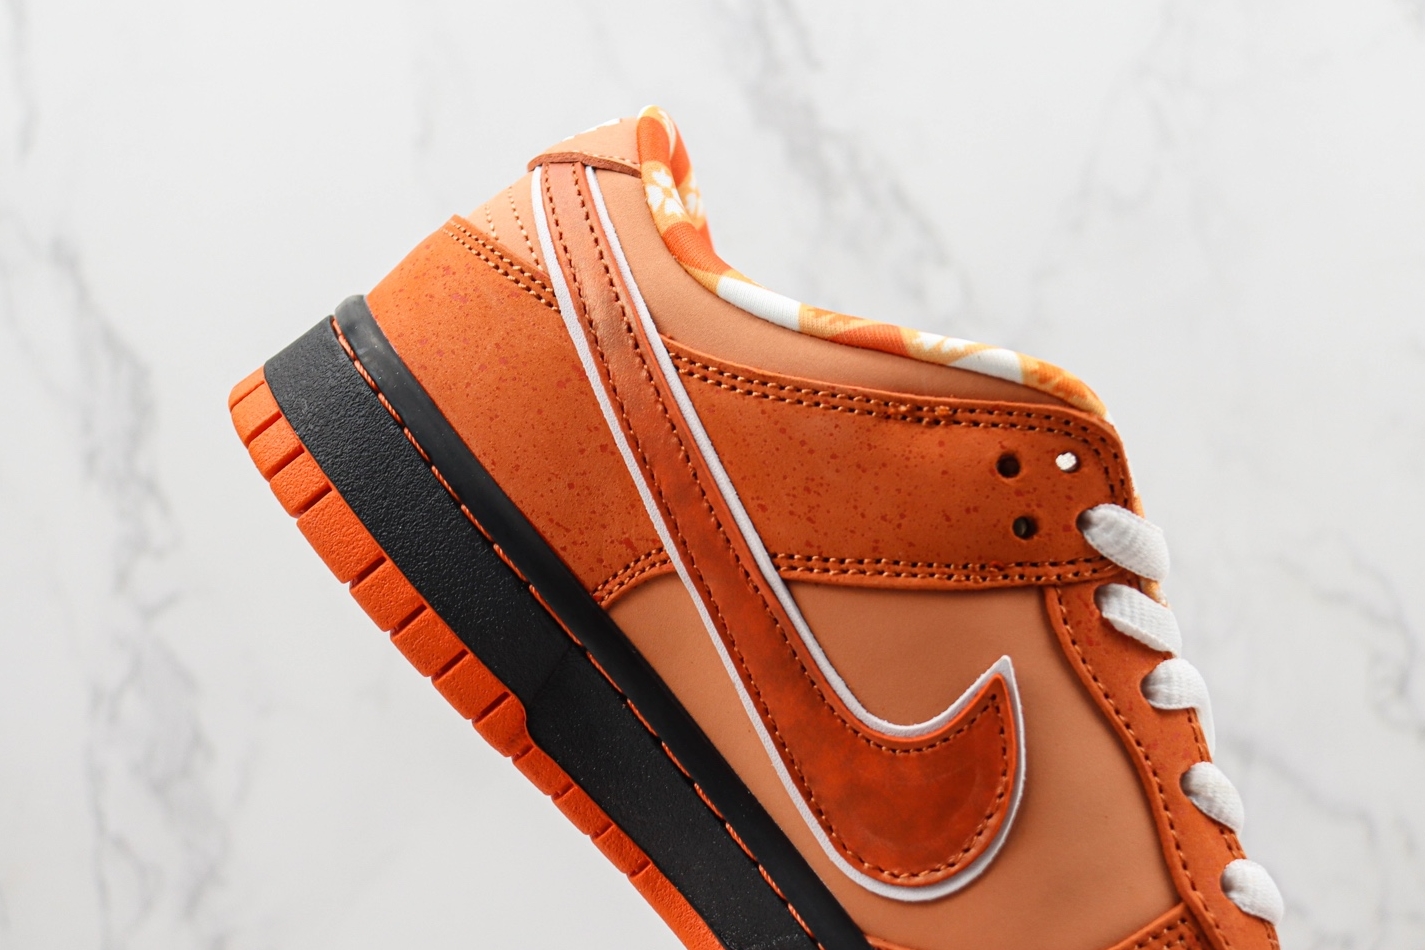 Nike SB Dunk Low 'Concepts Orange Lobster' FD8776-800 - Limited Edition Stylish Sneakers